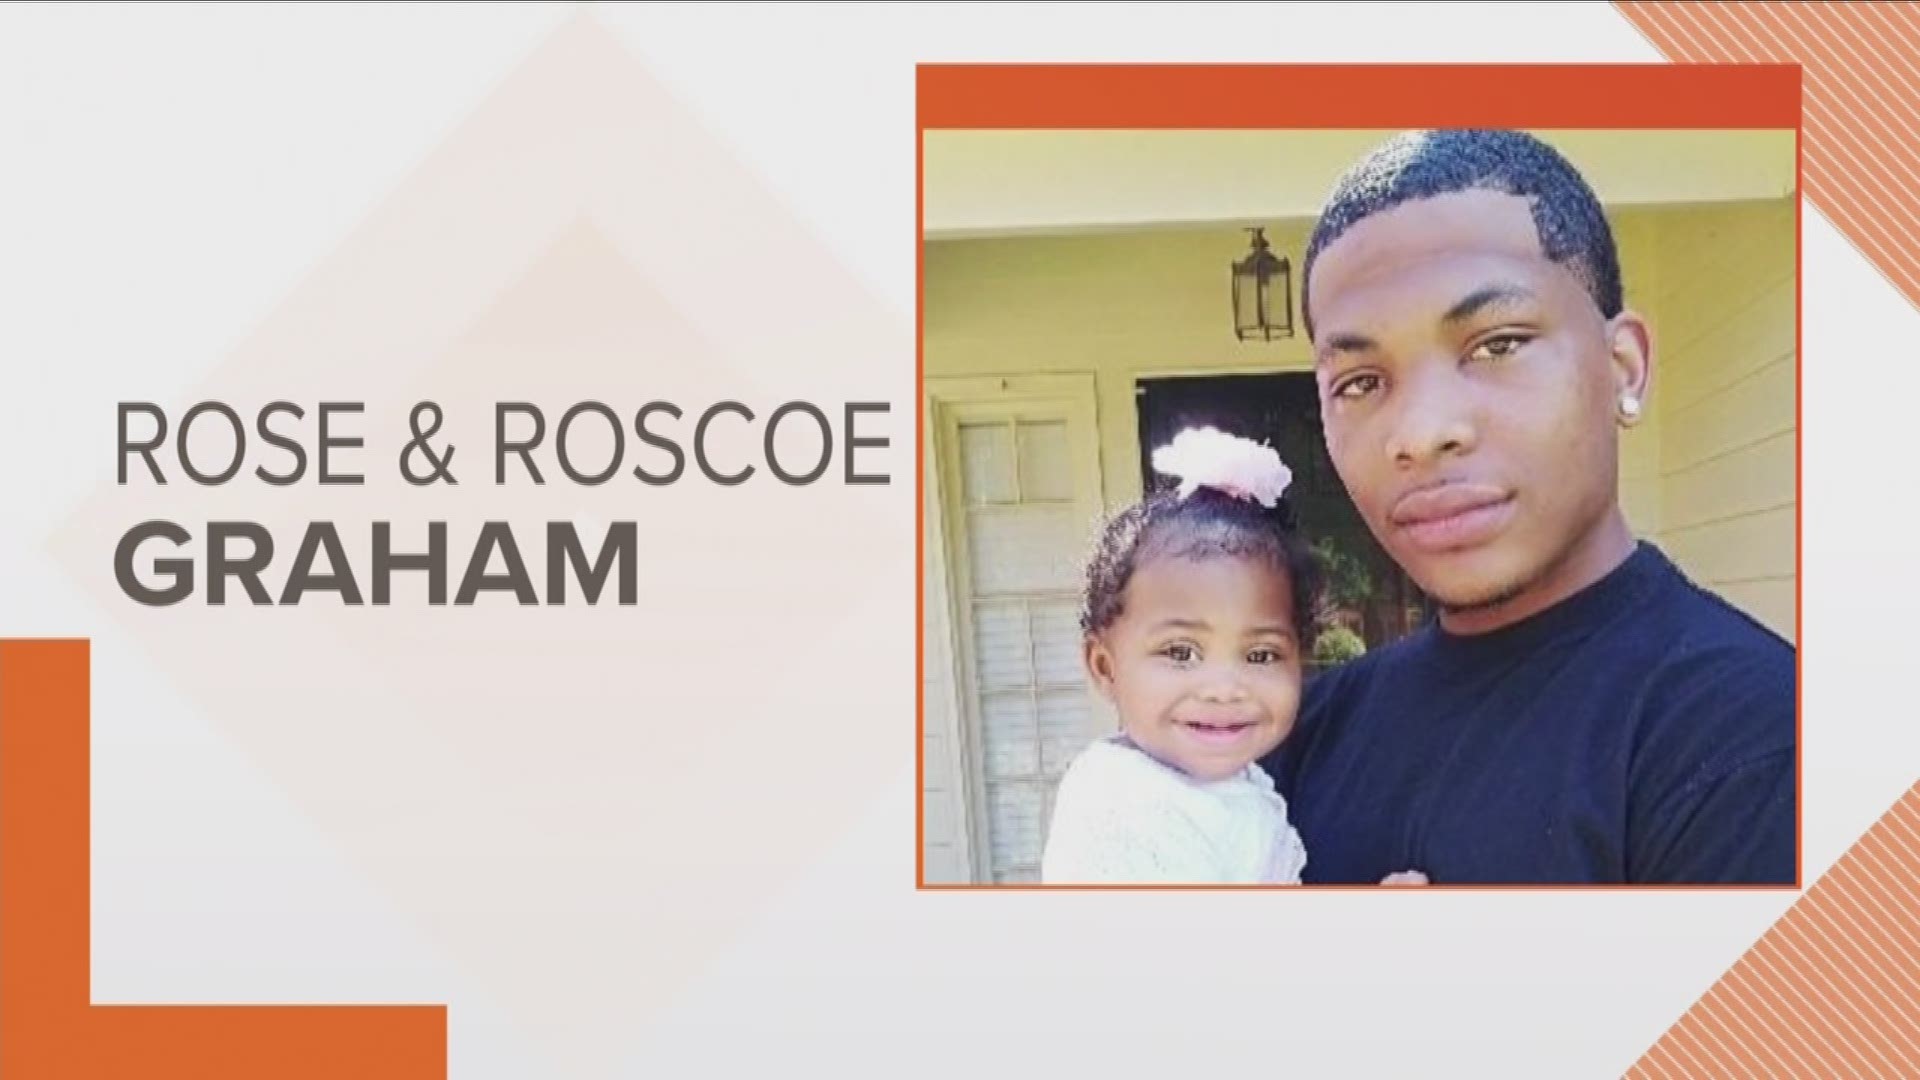 The TBI says an 11-month-old baby is now safe after a statewide amber alert. The TBI issued Tuesday morning for Rose Graham of Memphis. The Shelby County Sheriff's Office says her biological father, Roscoe Graham, is in custody.